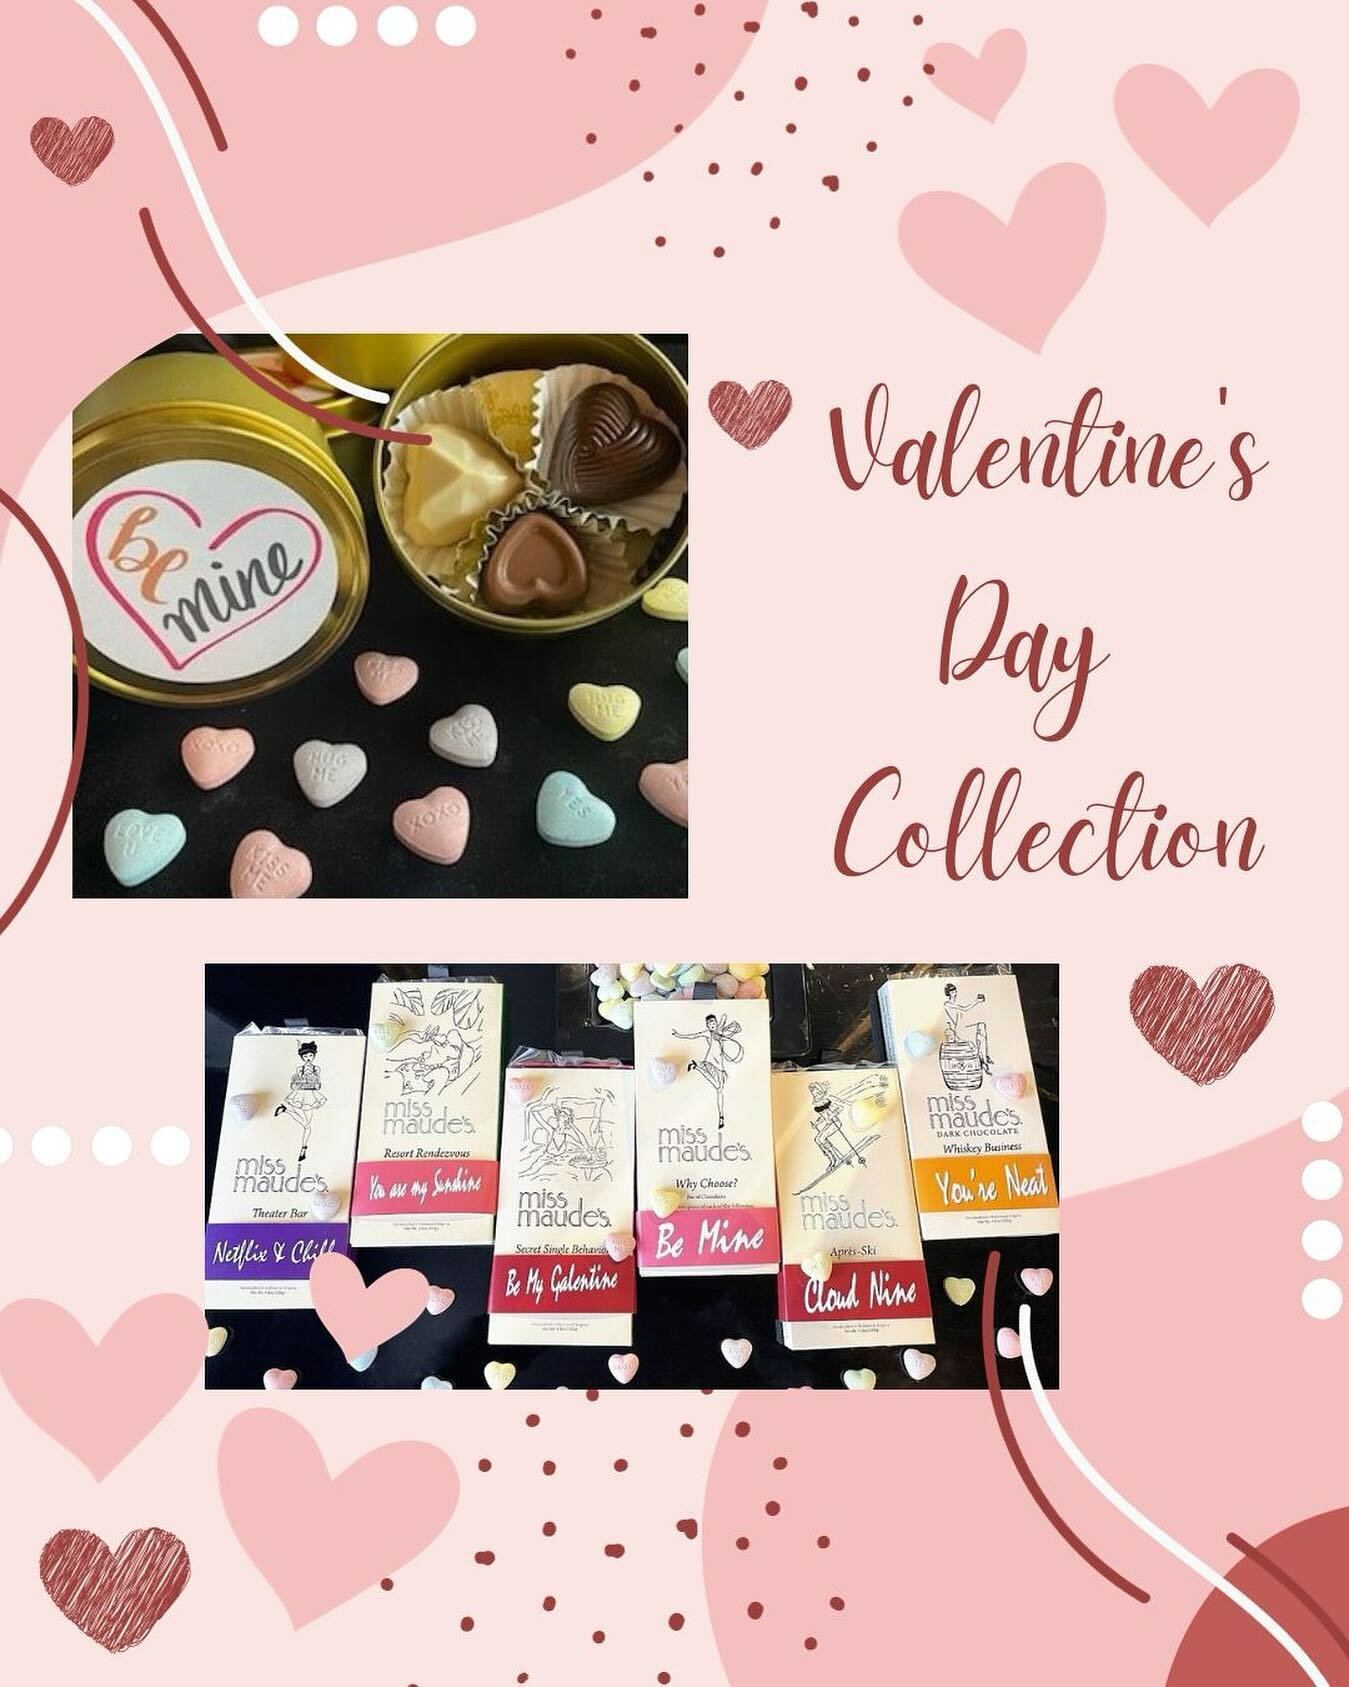 Indulge in love &amp; chocolate!

For Valentine&rsquo;s Day, we are thrilled to introduce enchanting new truffles in milk, dark, and white chocolate! We also offer the perfect way to personalize your sweet gesture- custom wraps that correspond to the